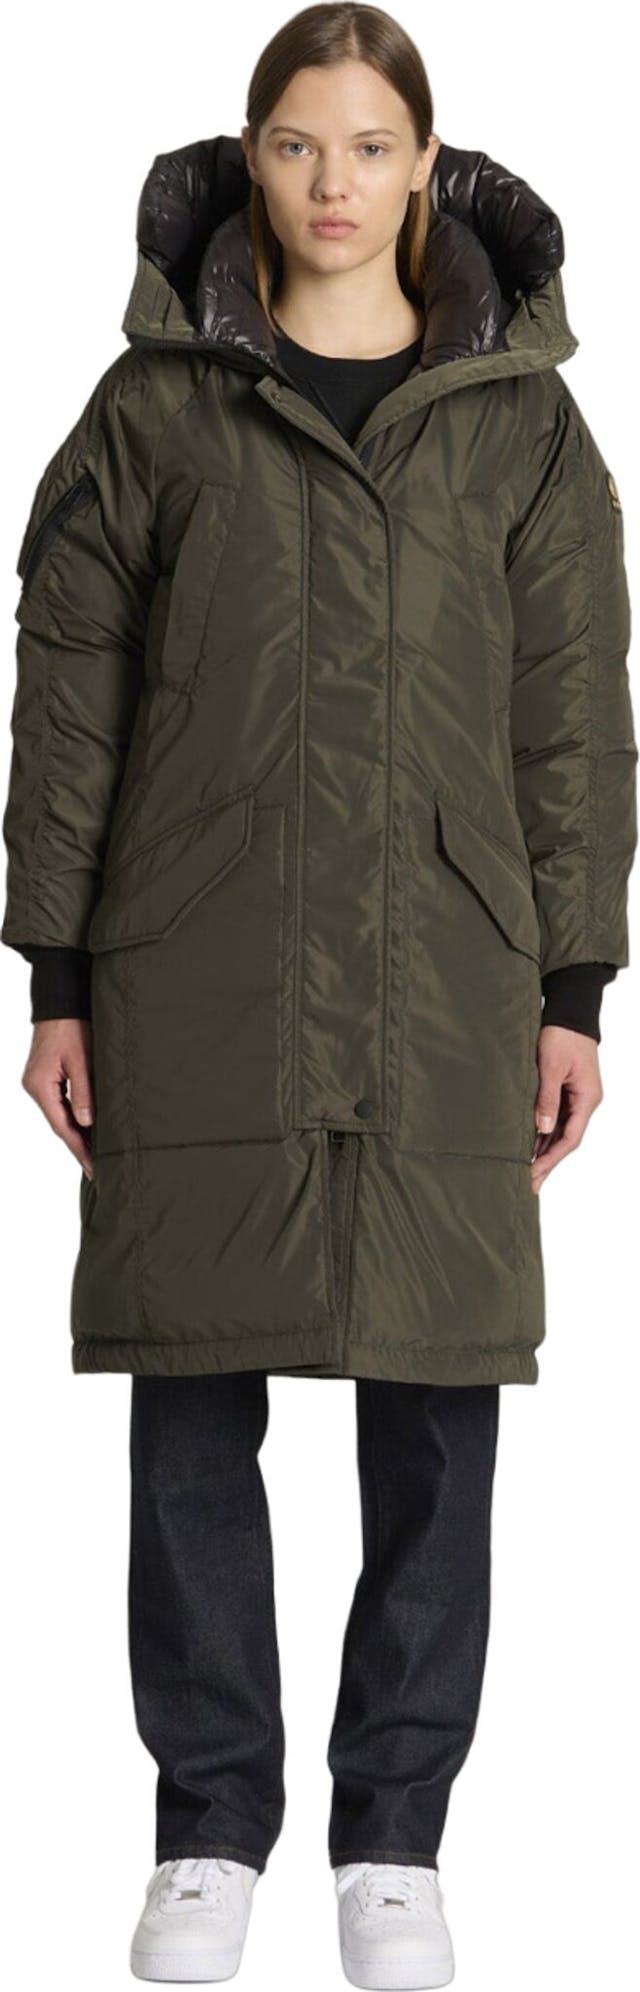 Product image for Moma Winter Parka - Women's